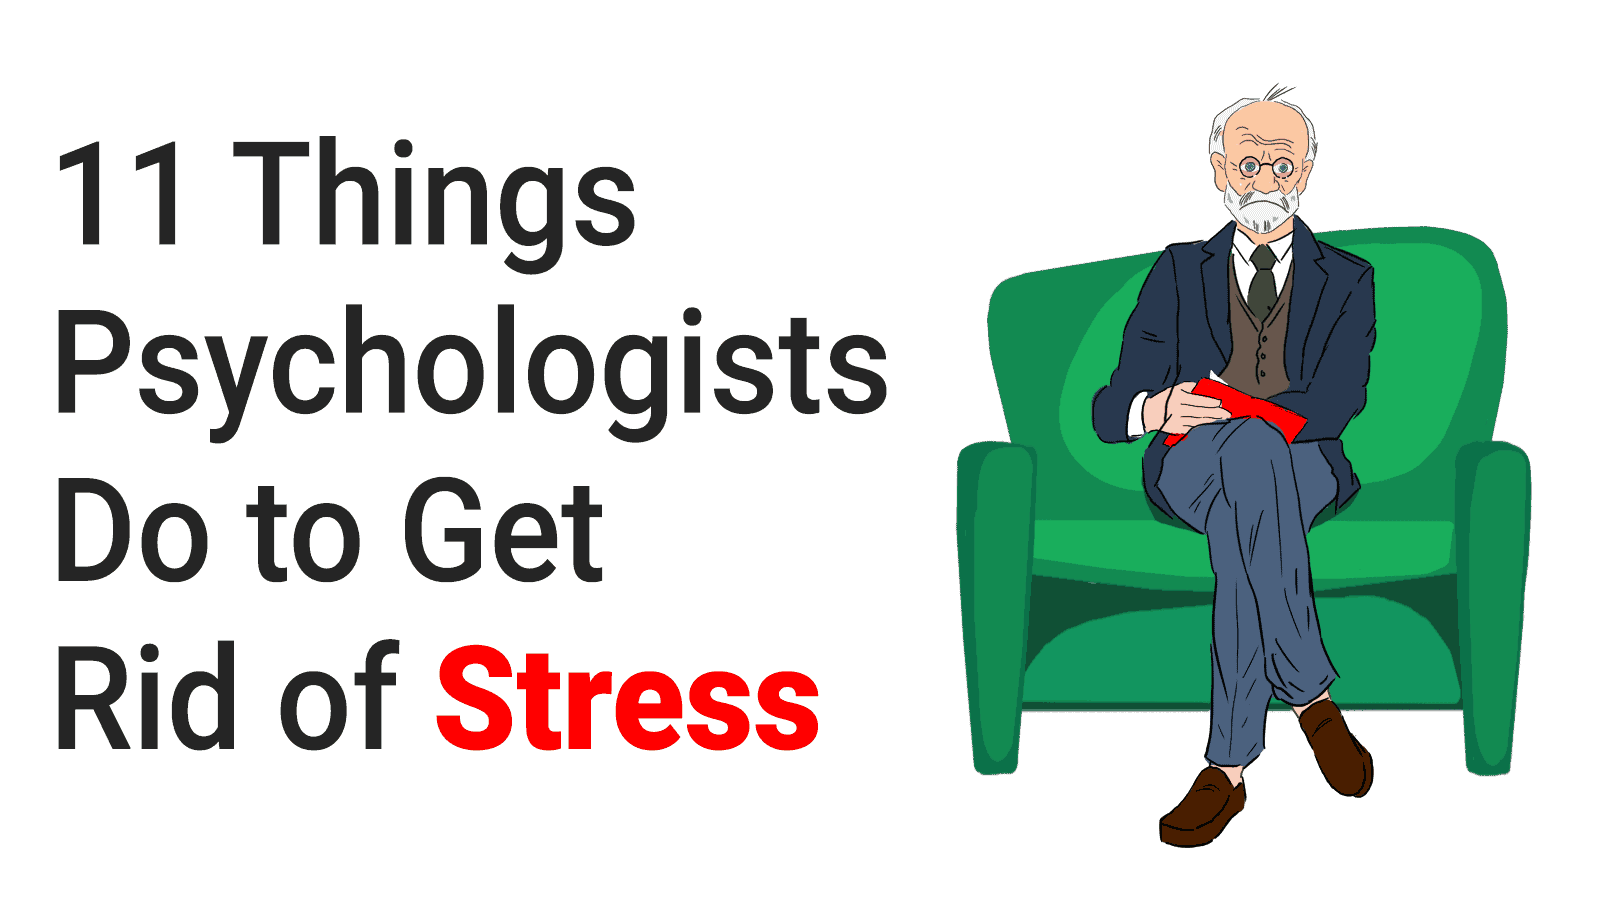 11 Things Psychologists Do to Get Rid of Stress